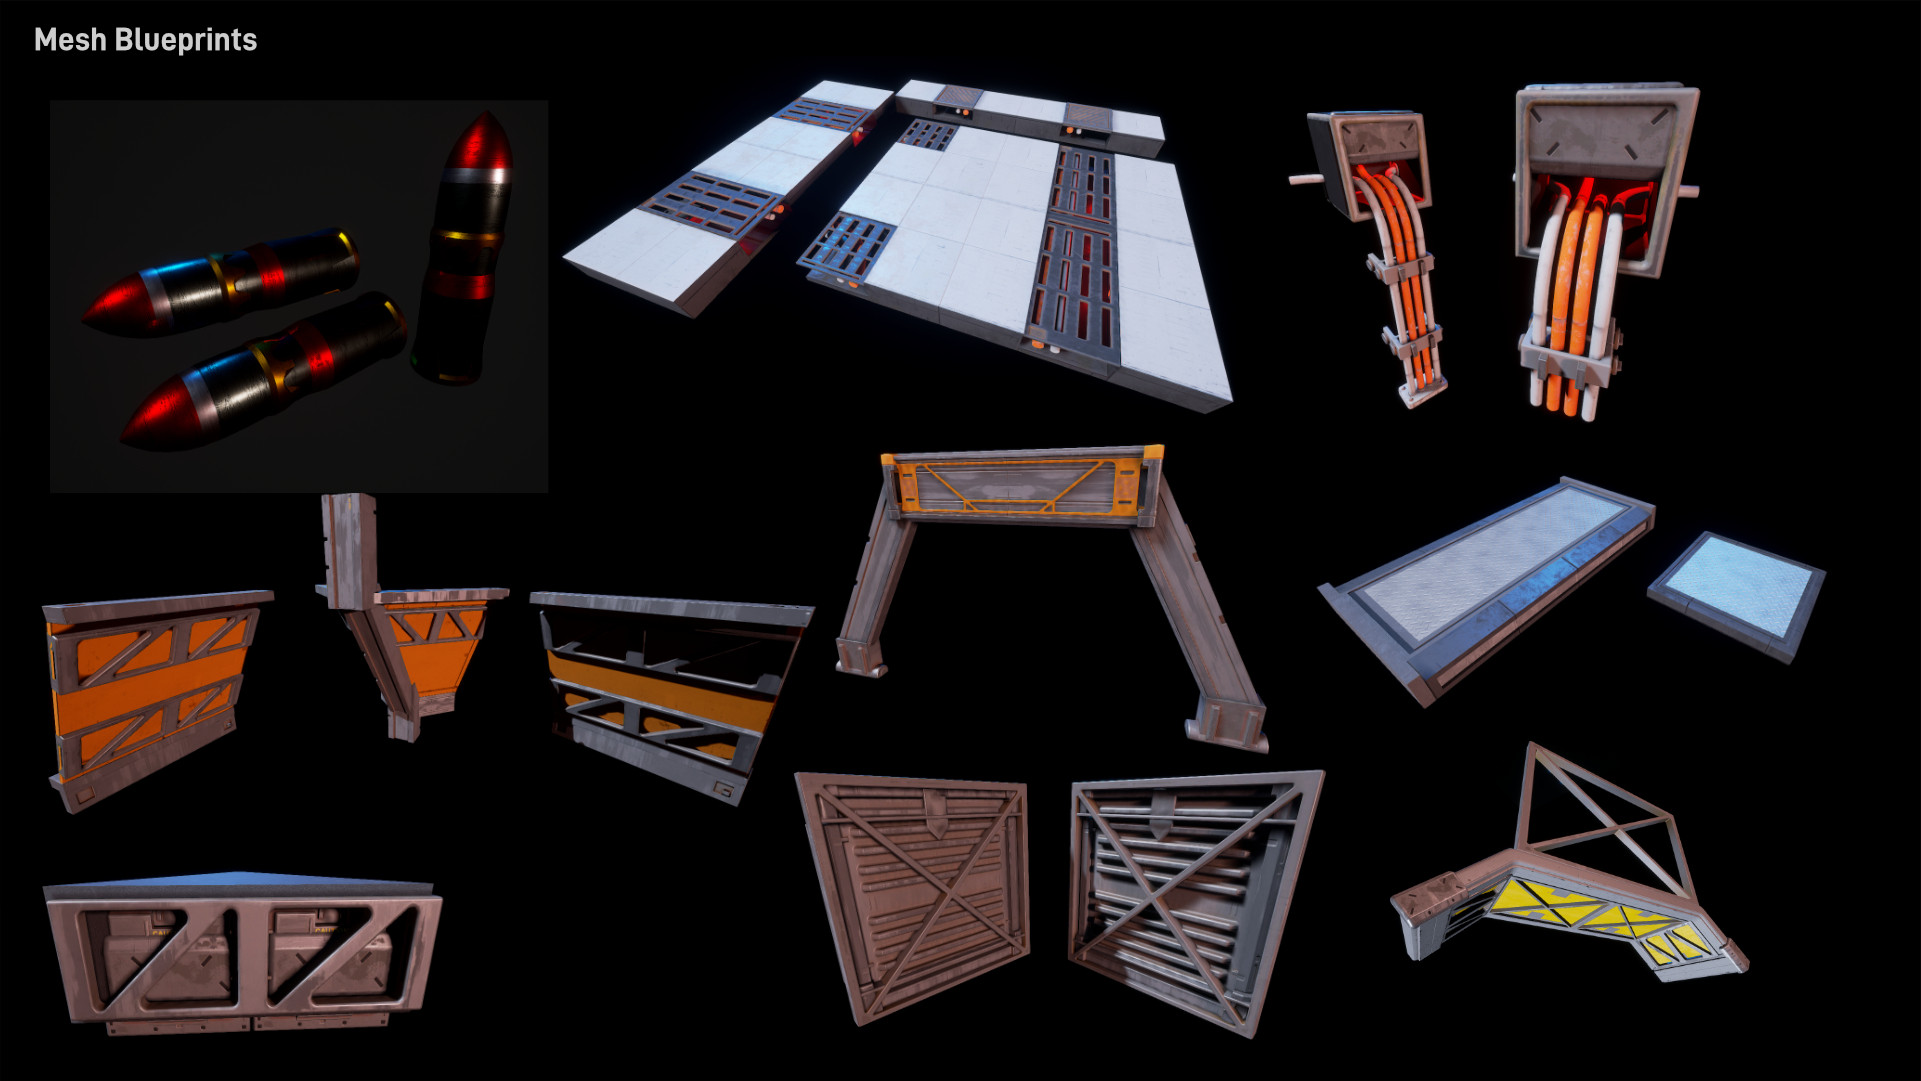 Static mesh blueprints made for ease of environment construction and editability.